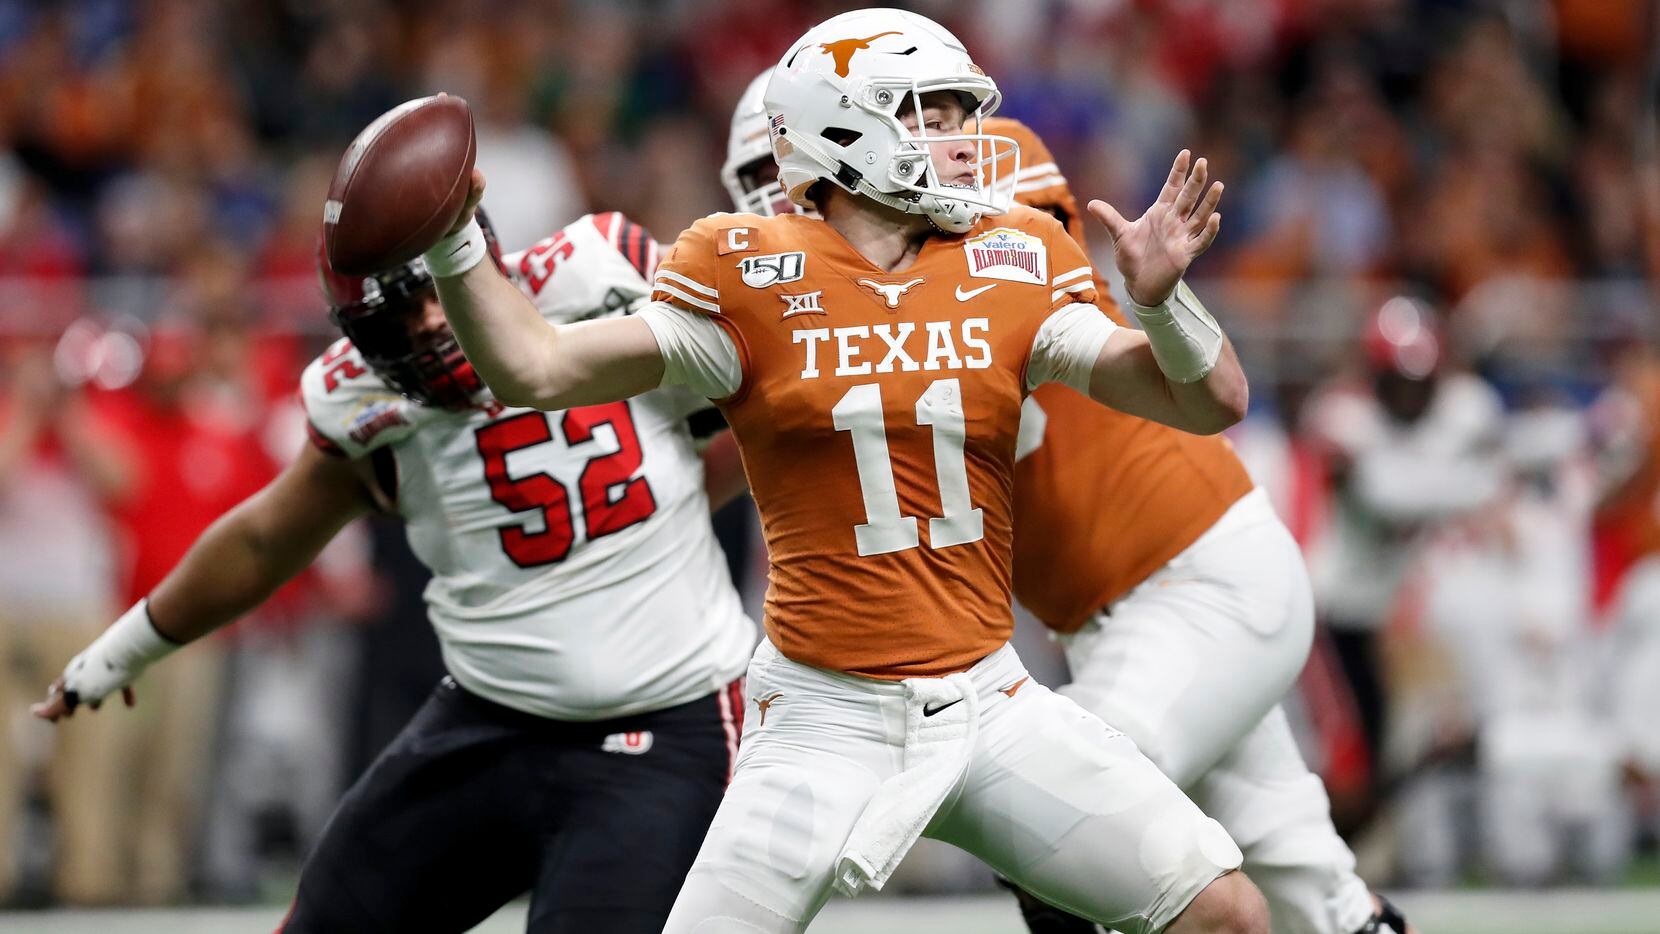 SAN ANTONIO, TX - DECEMBER 31:  Sam Ehlinger #11 of the Texas Longhorns throws a pass under pressure by John Penisini #52 of the Utah Utes in the first quarter during the Valero Alamo Bowl at the Alamodome on December 31, 2019 in San Antonio, Texas.  (Photo by Tim Warner/Getty Images)